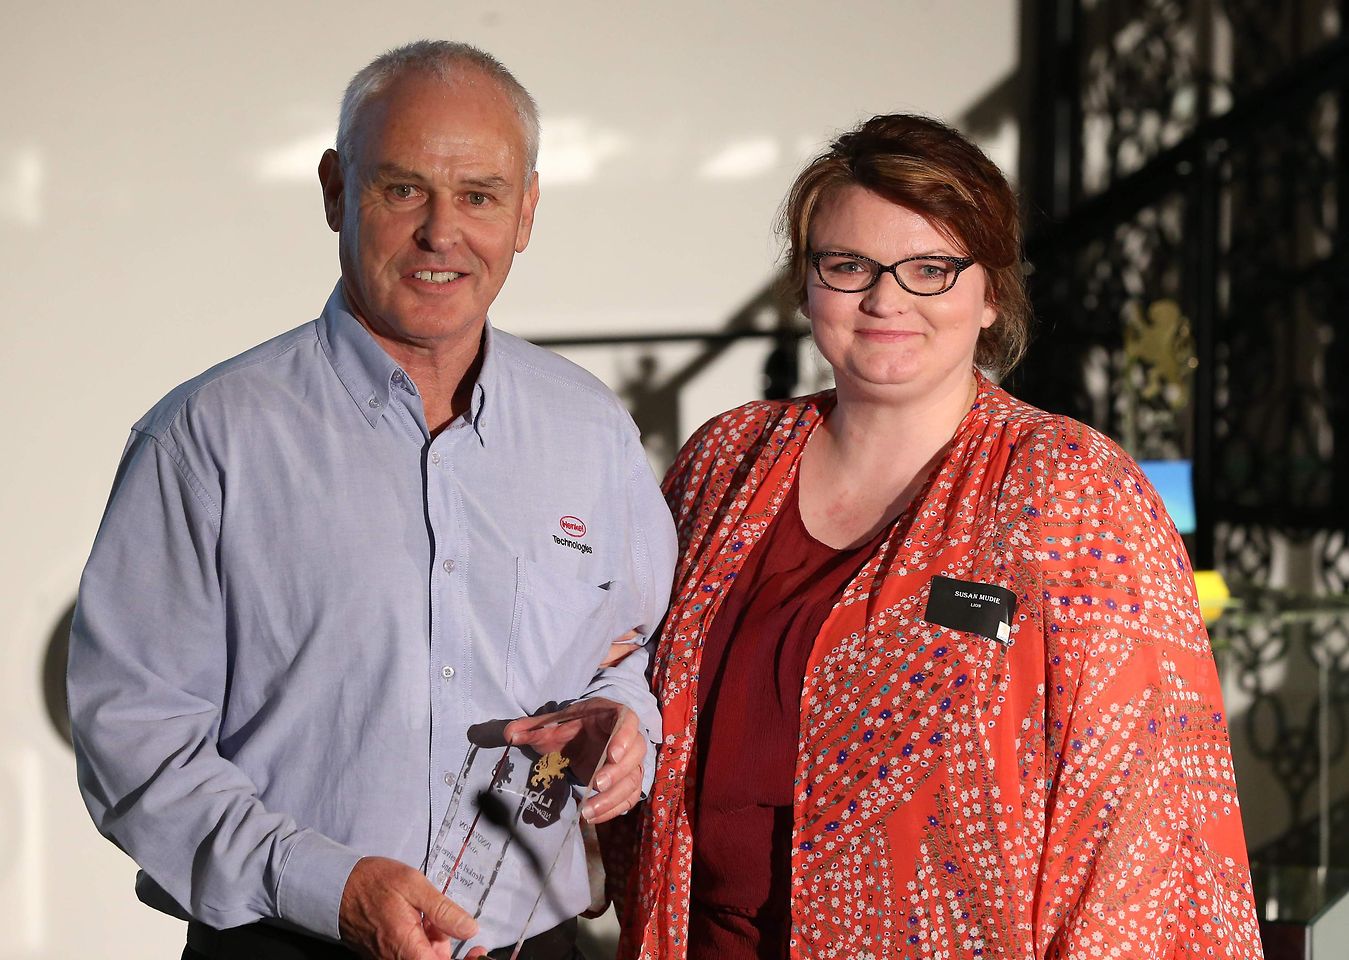 Colin Hooper, Account Manager Adhesive Technologies, Henkel New Zealand, accepted the innovation award from Susan Mudi, Innovation Manager, Lion Beer, Spirits & Wine (New Zealand).